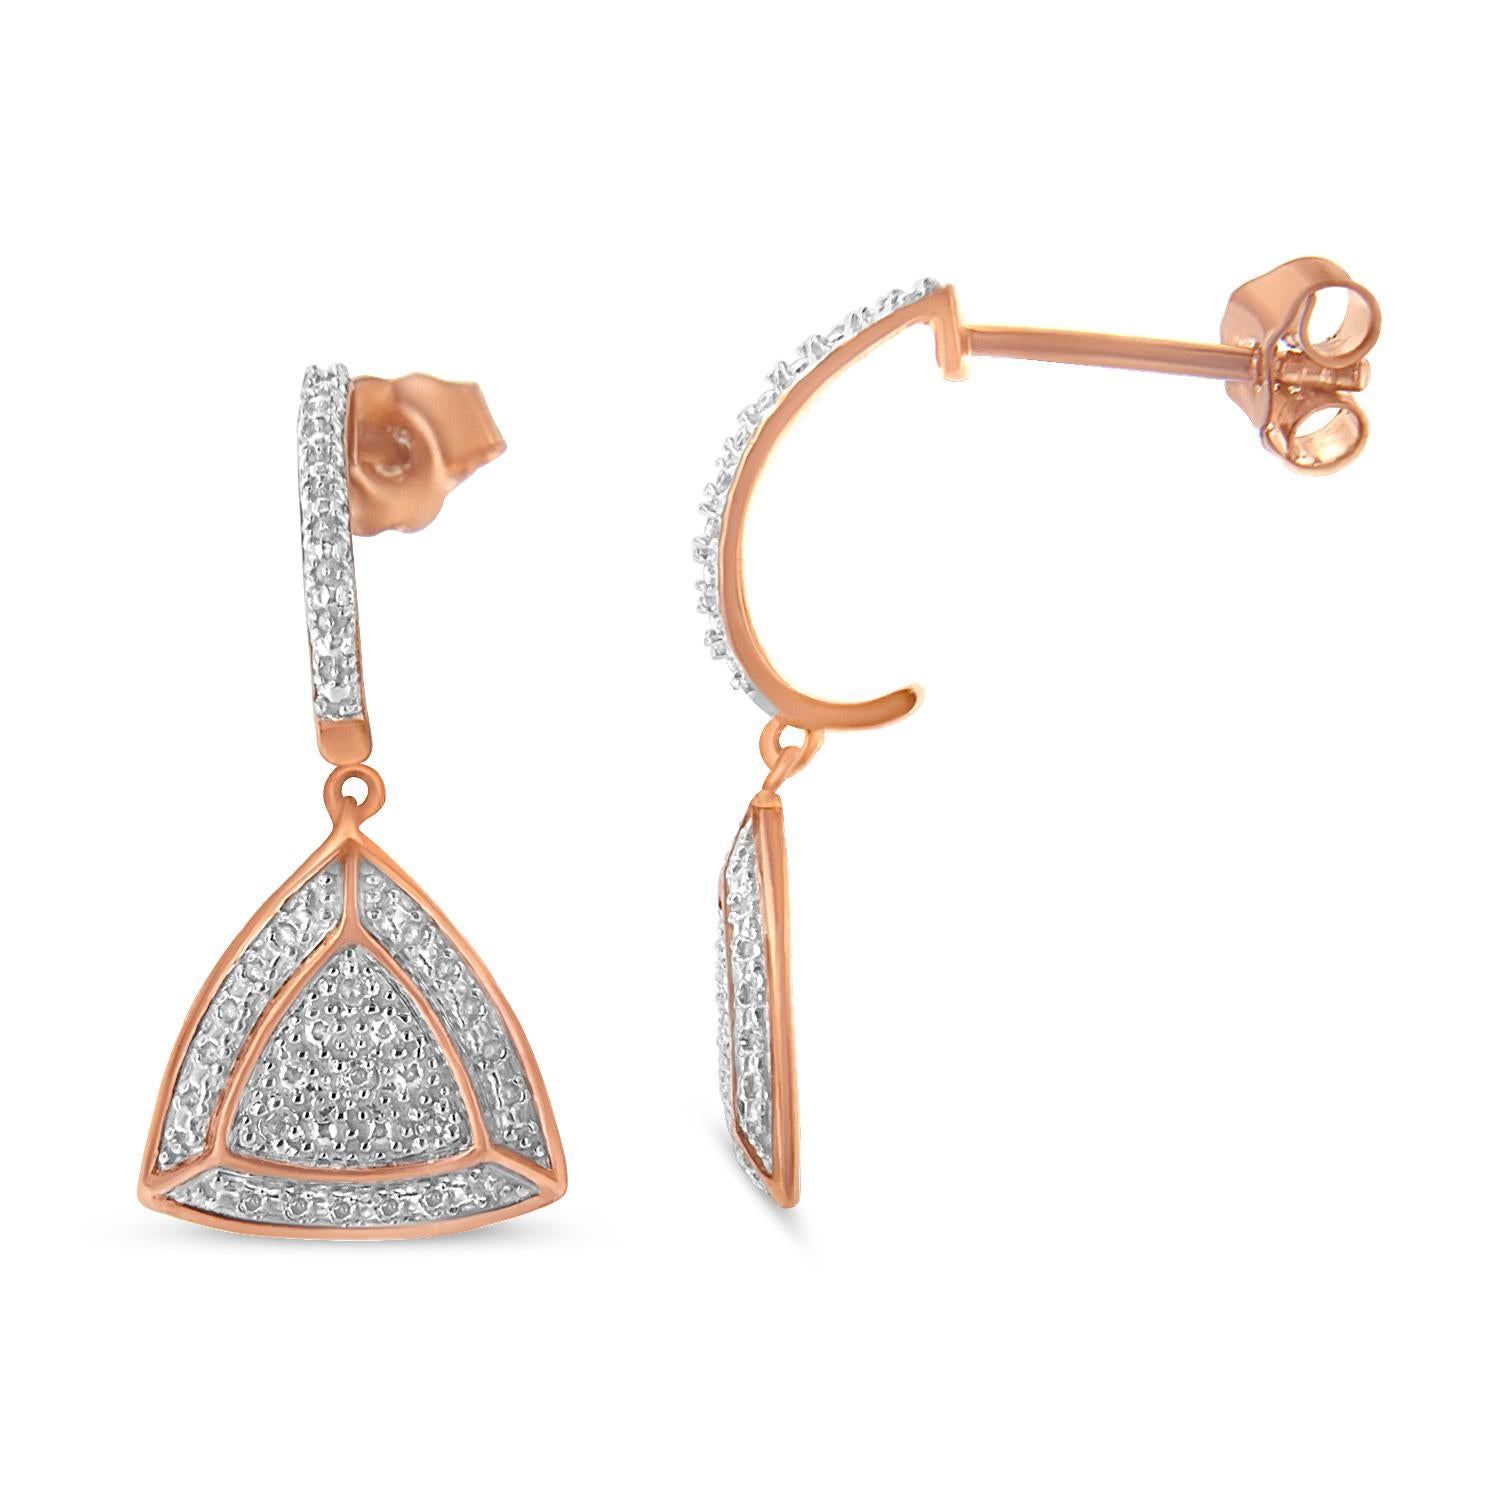 Win her heart by presenting these lovely dangle earrings. It is composed of sterling silver and plated with rose gold for extra appeal. Fashioned in the triangle shape, the pair of earrings is encrusted with shimmering round cut diamonds. All the